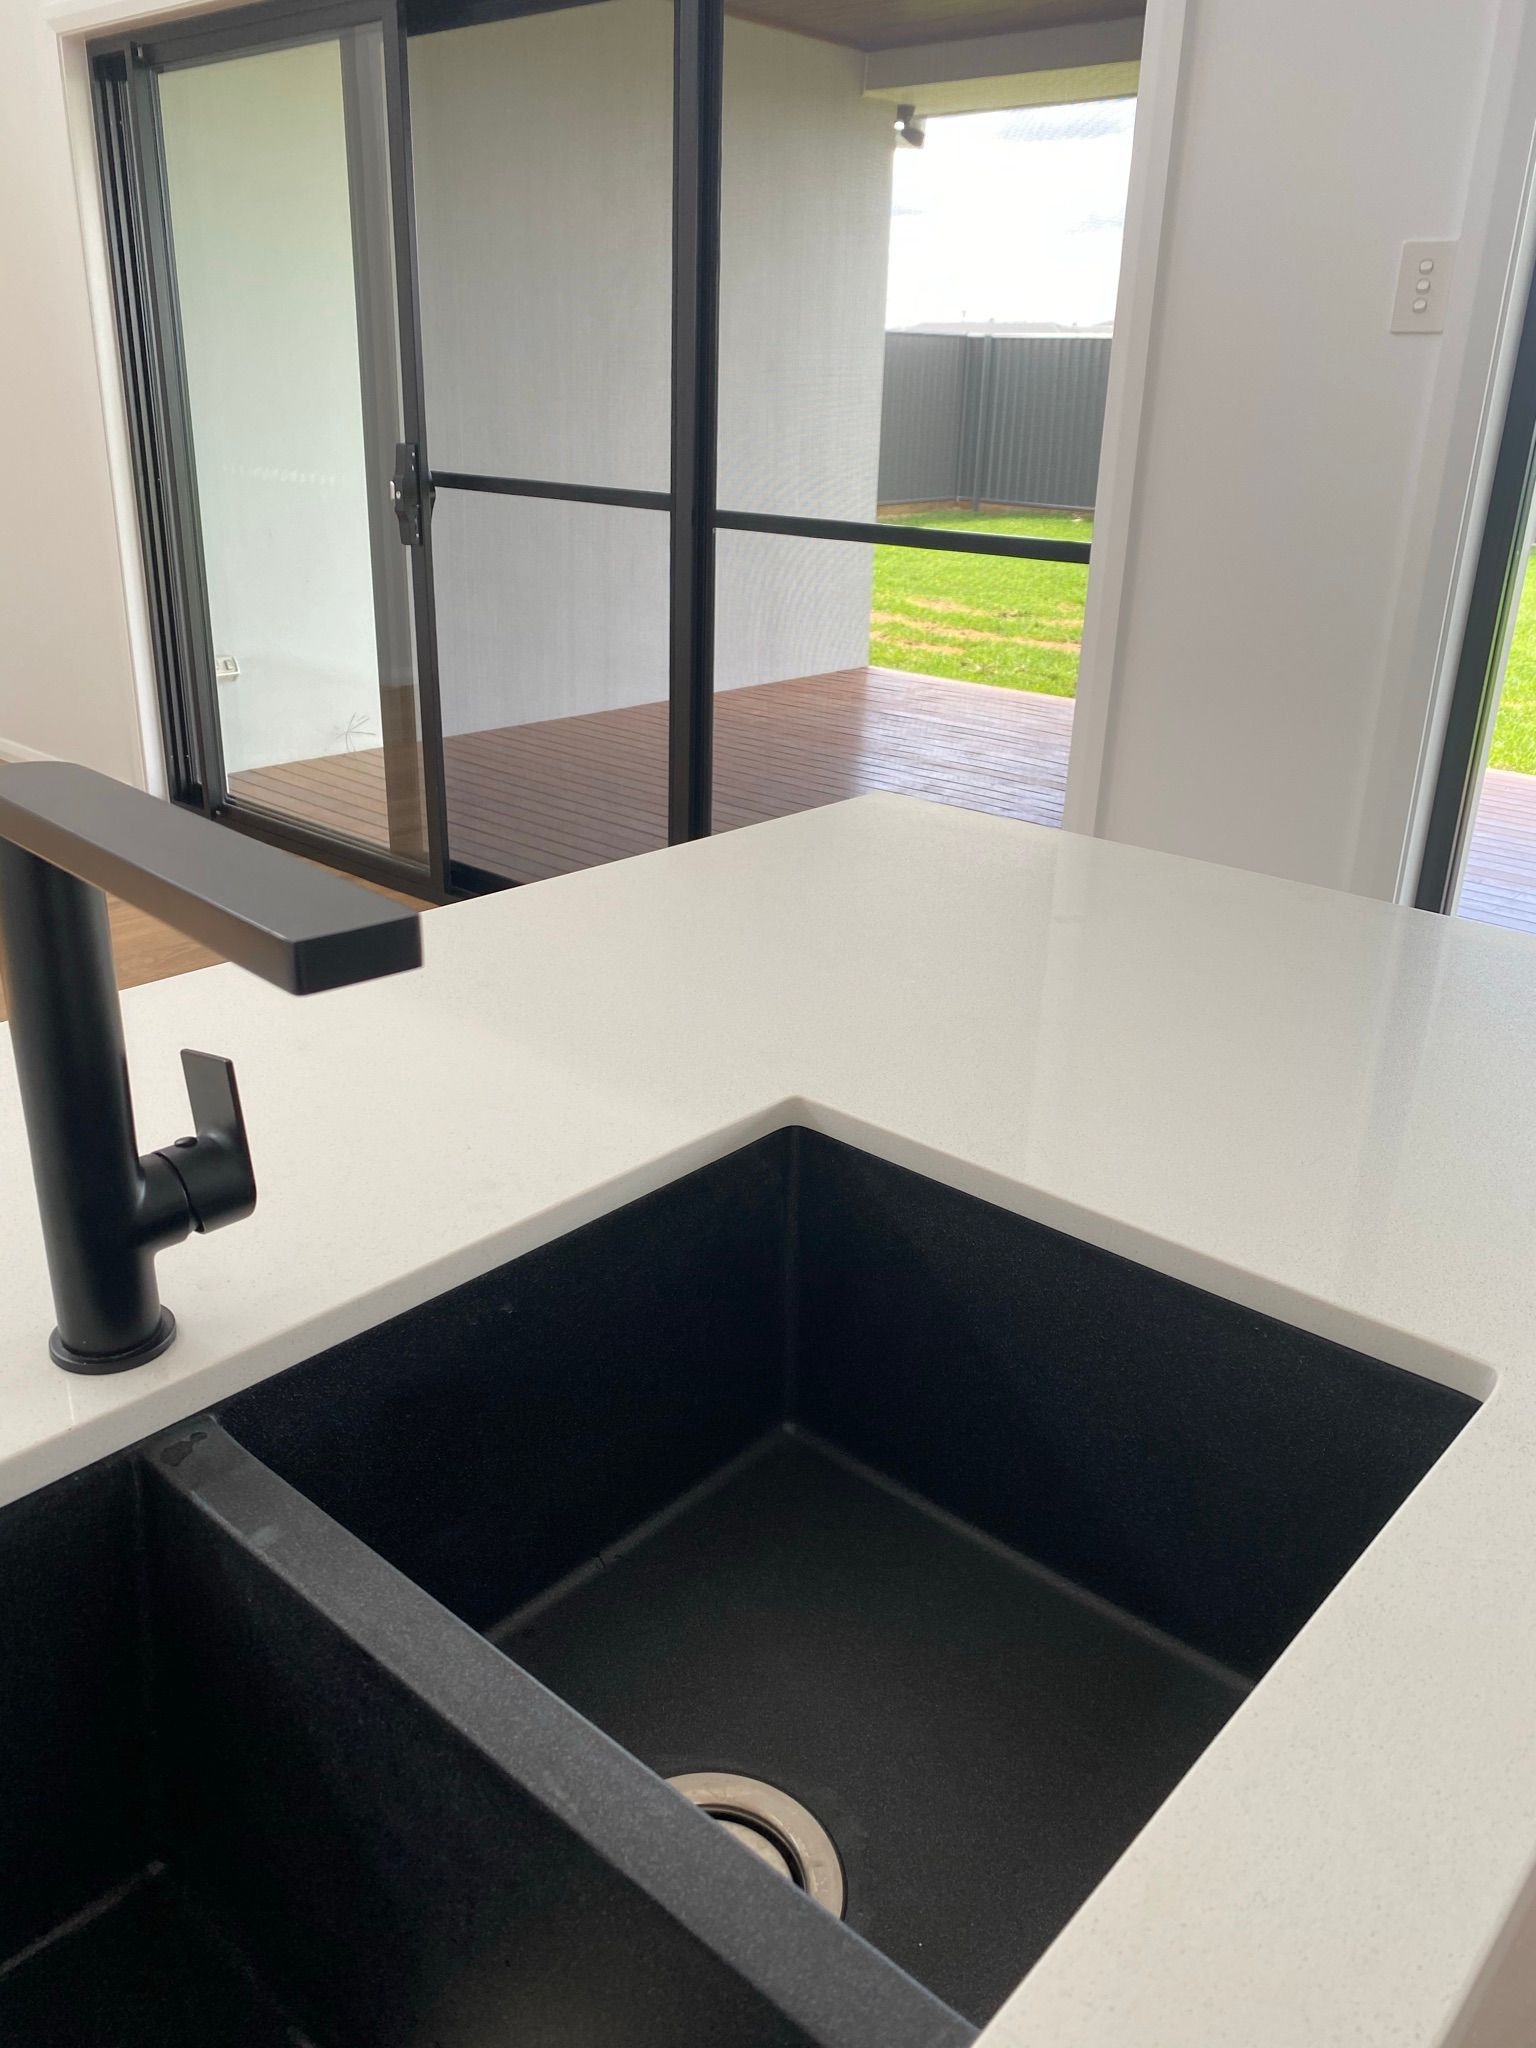 Black Sink and Faucet — Kitchen Renovations in Dubbo, QLD